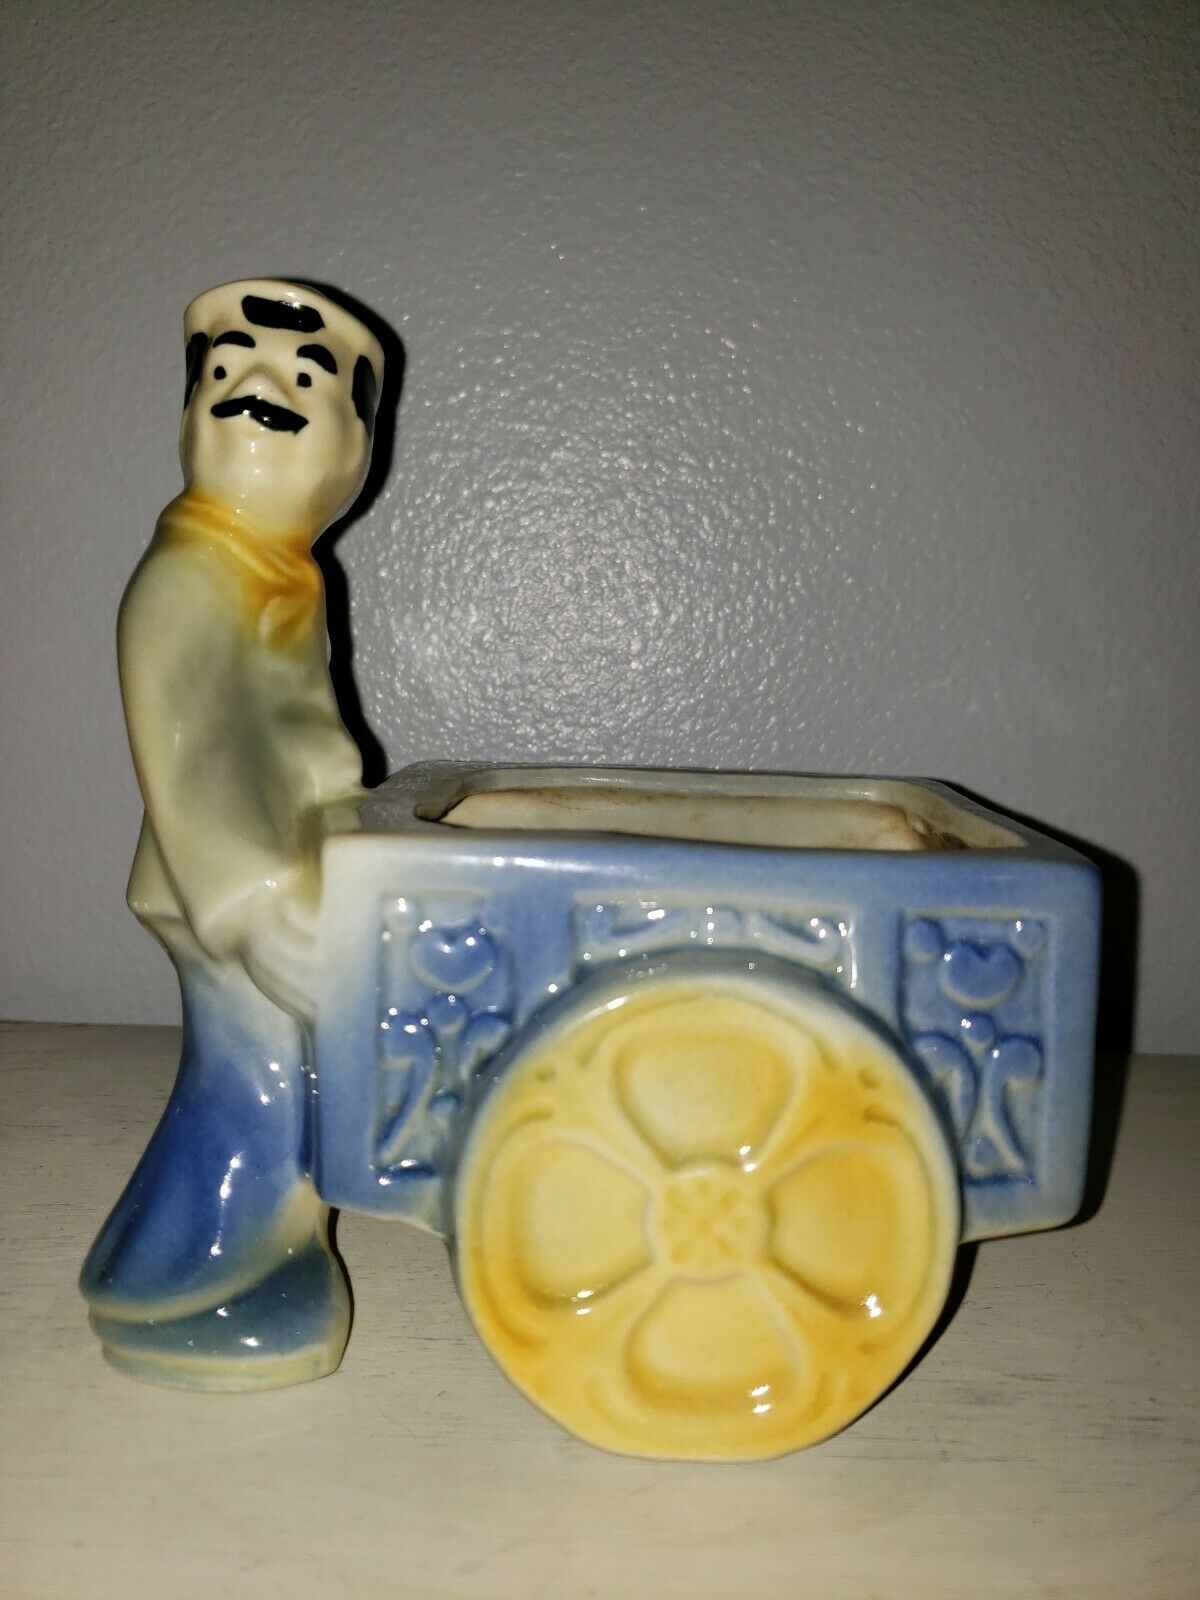 Vintage Shawnee Pottery Man With Cart Planter #621 Multi Colored